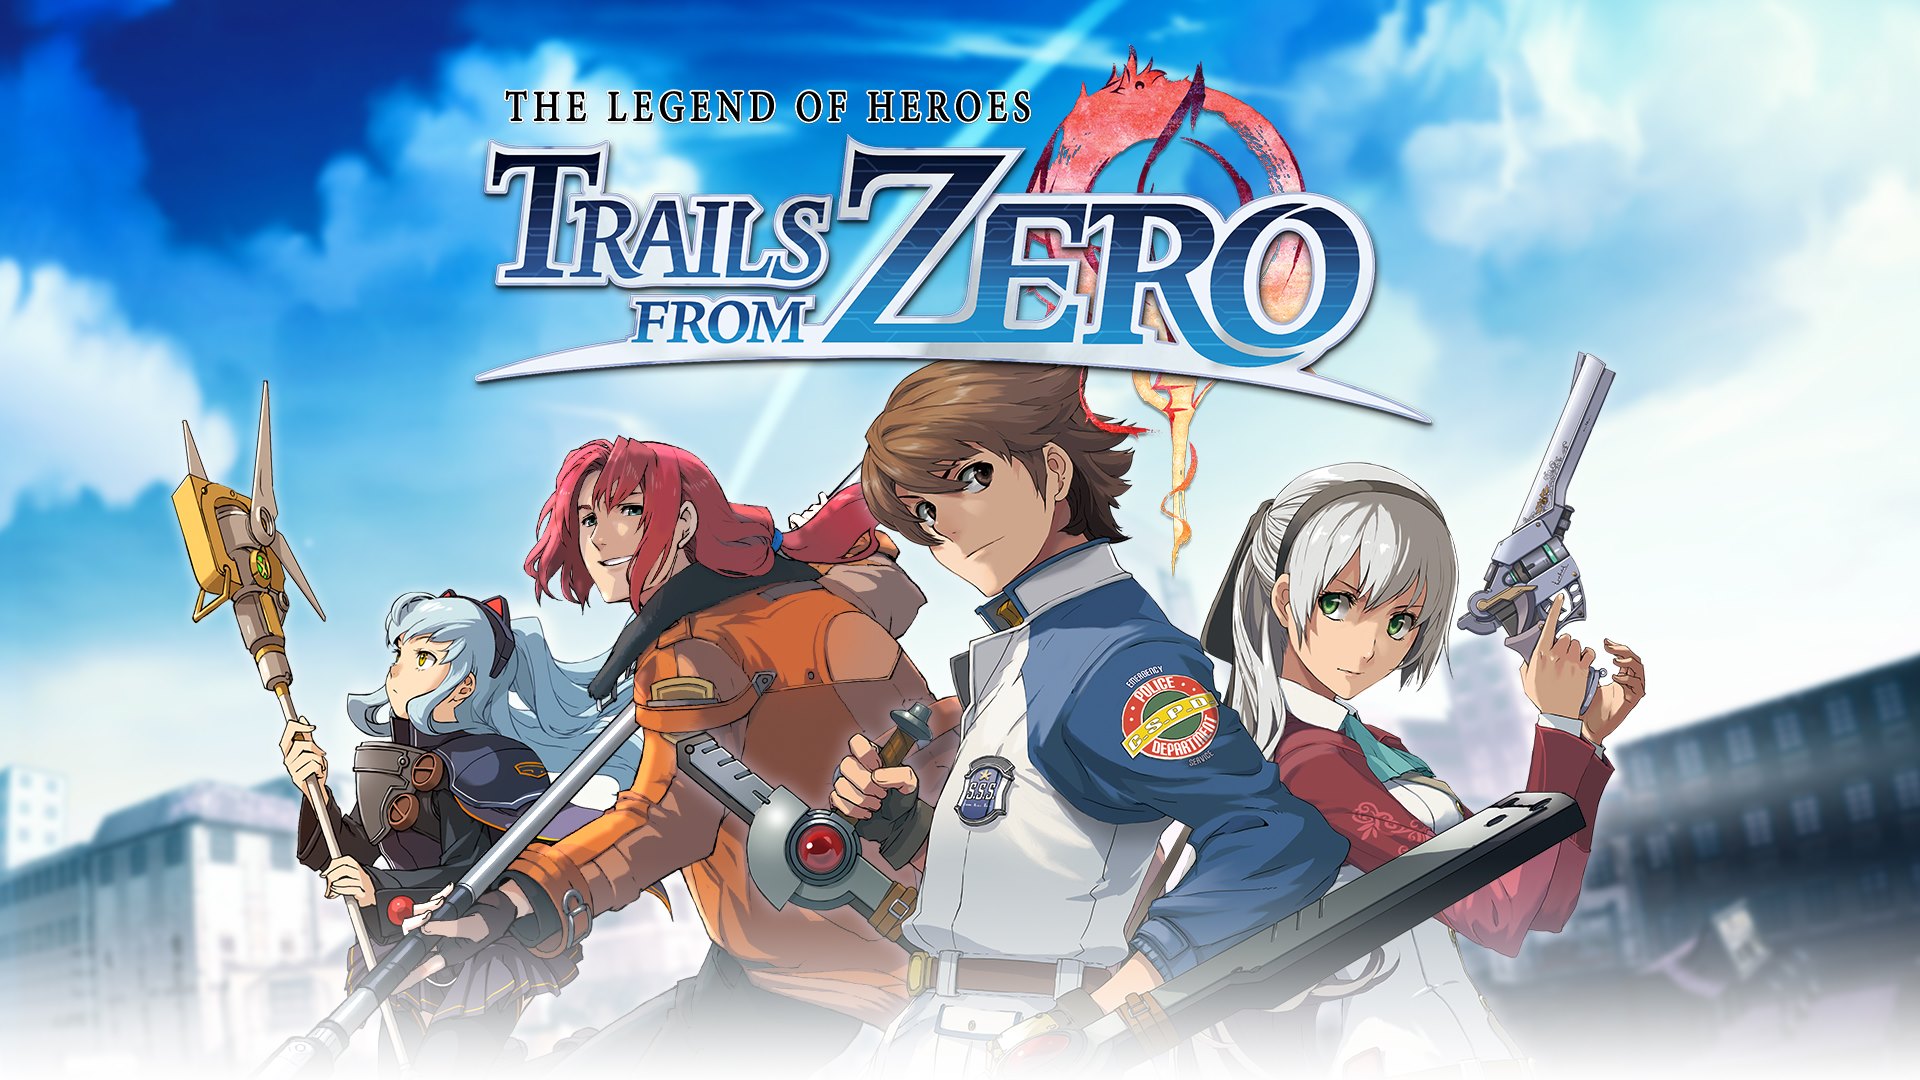 The Legends of Heroes: Trails from Zero